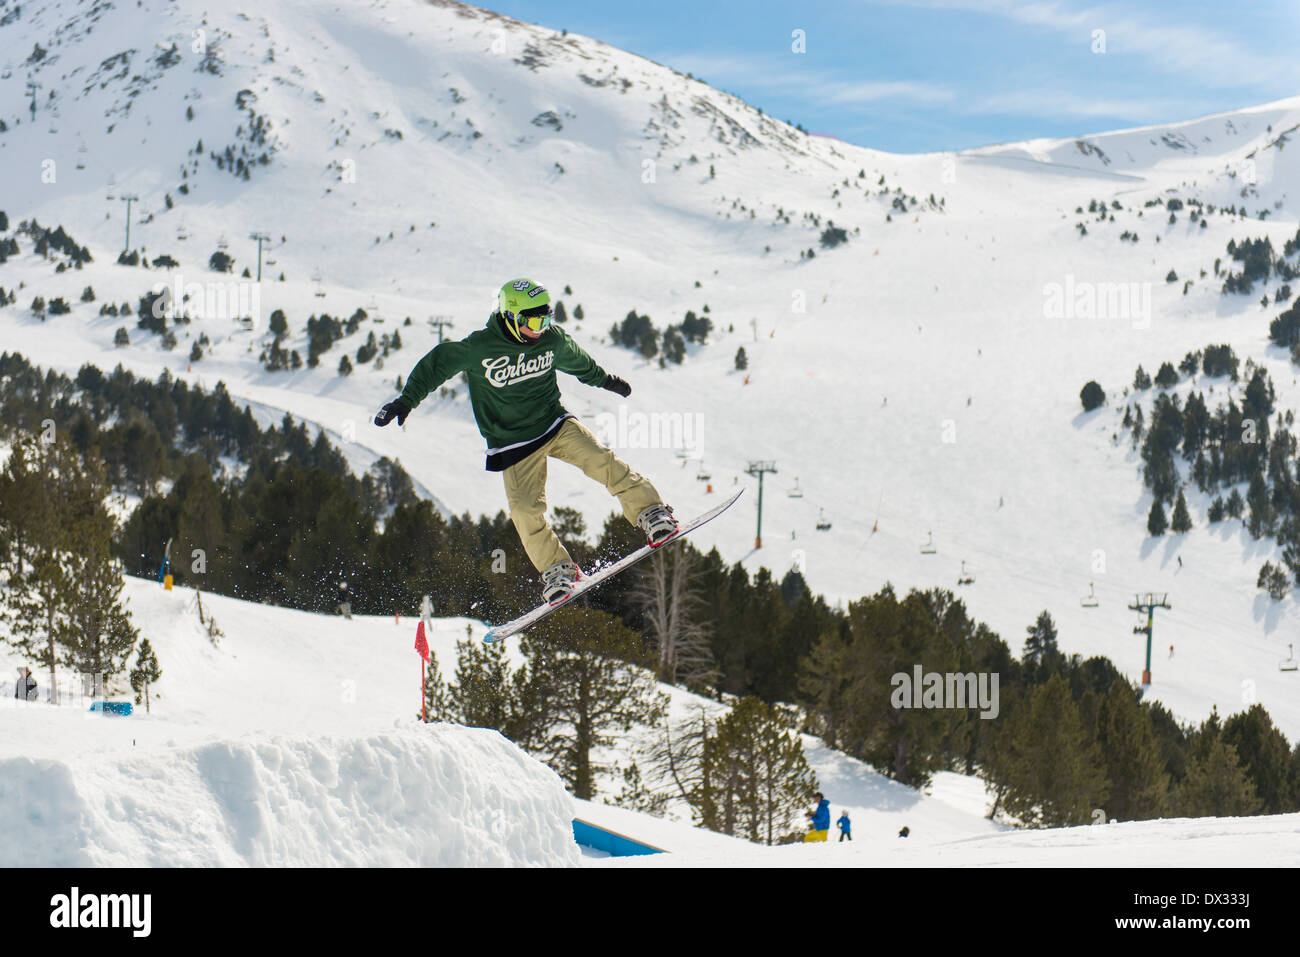 Freestyle Snowboarders jumping and pulling tricks in the winter sports resort of Soldeu, Andorra. Stock Photo